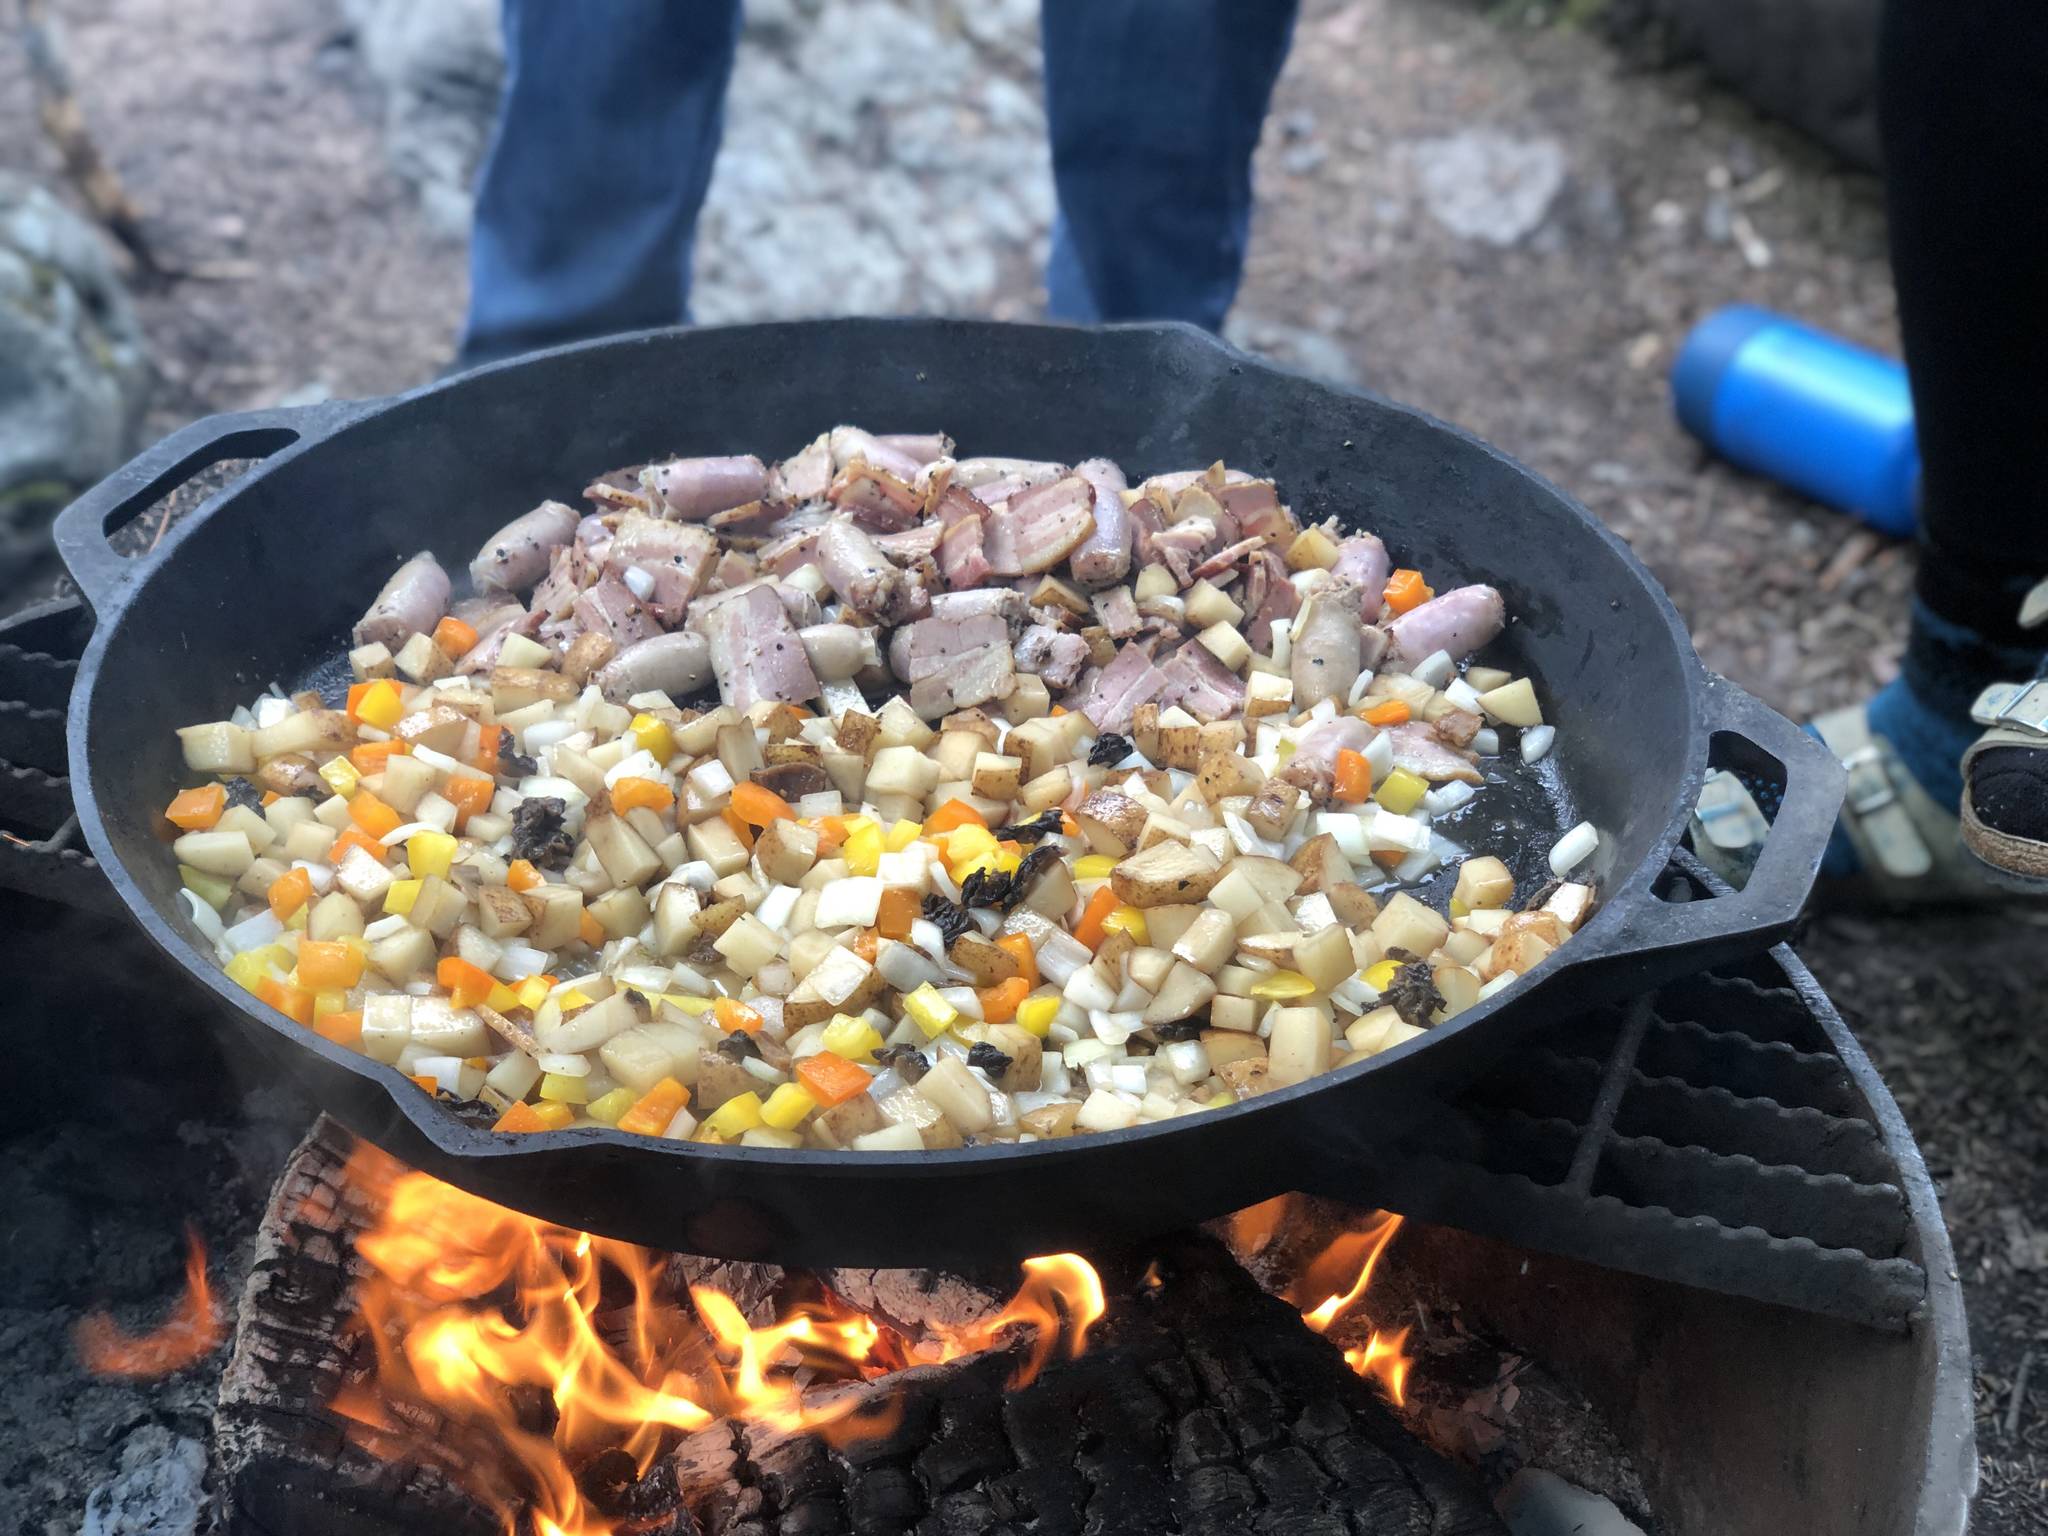 Hash with bacon, potatoes, cheese, sausage, chopped bell peppers and morel mushrooms are prepared on a fire pit, June 19, in the Copper River Valley. (Photo by Victoria Petersen/Peninsula Clarion)